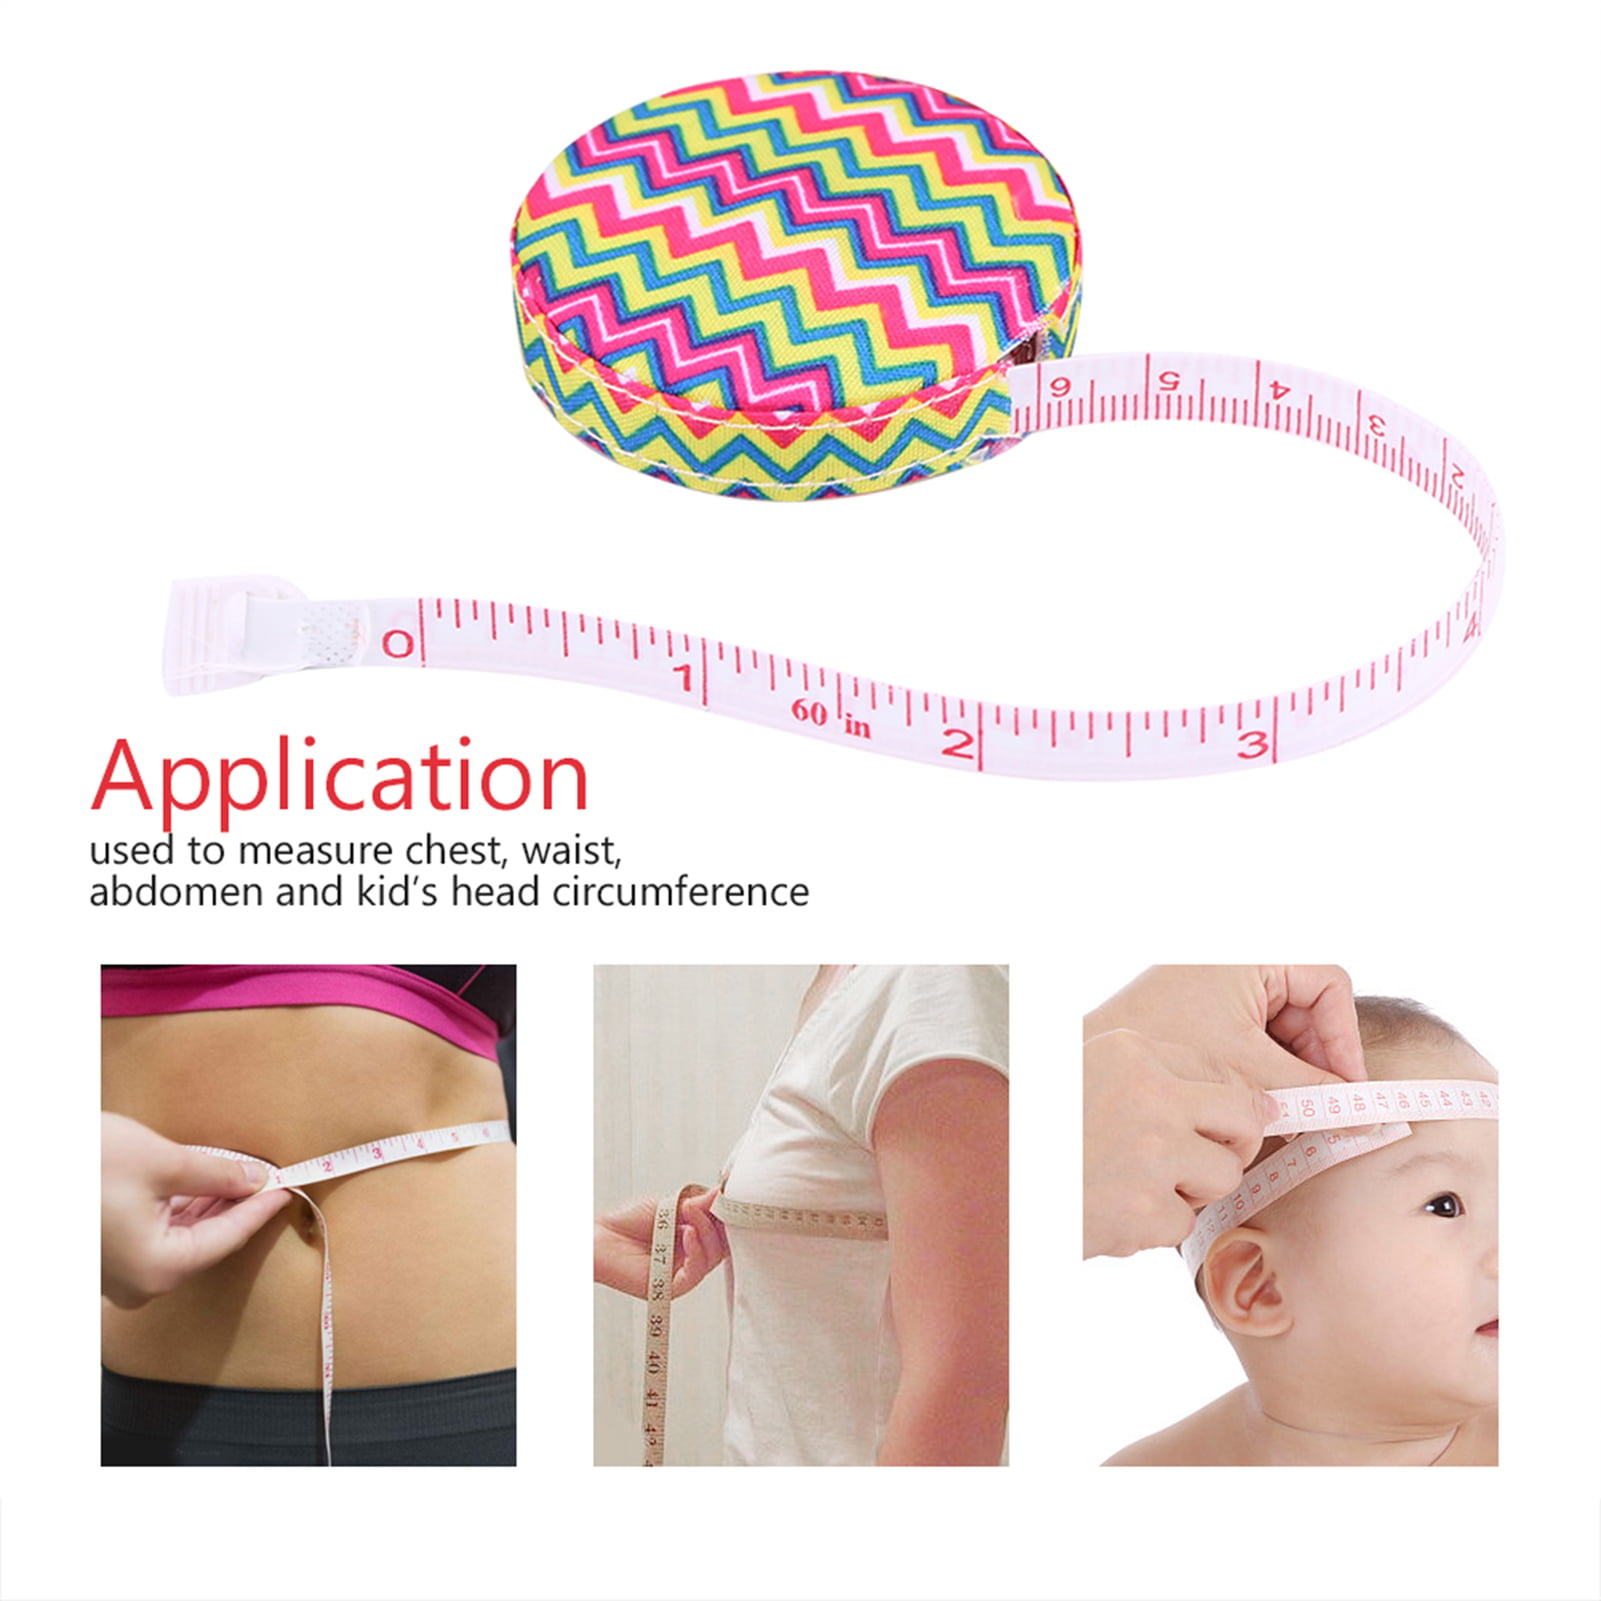 1pc Soft Tape Measure For Measuring Body Circumference - Waist, Hips,  Thigh, Arms, Chest, Etc. - Great For Fitness & Bodybuilding